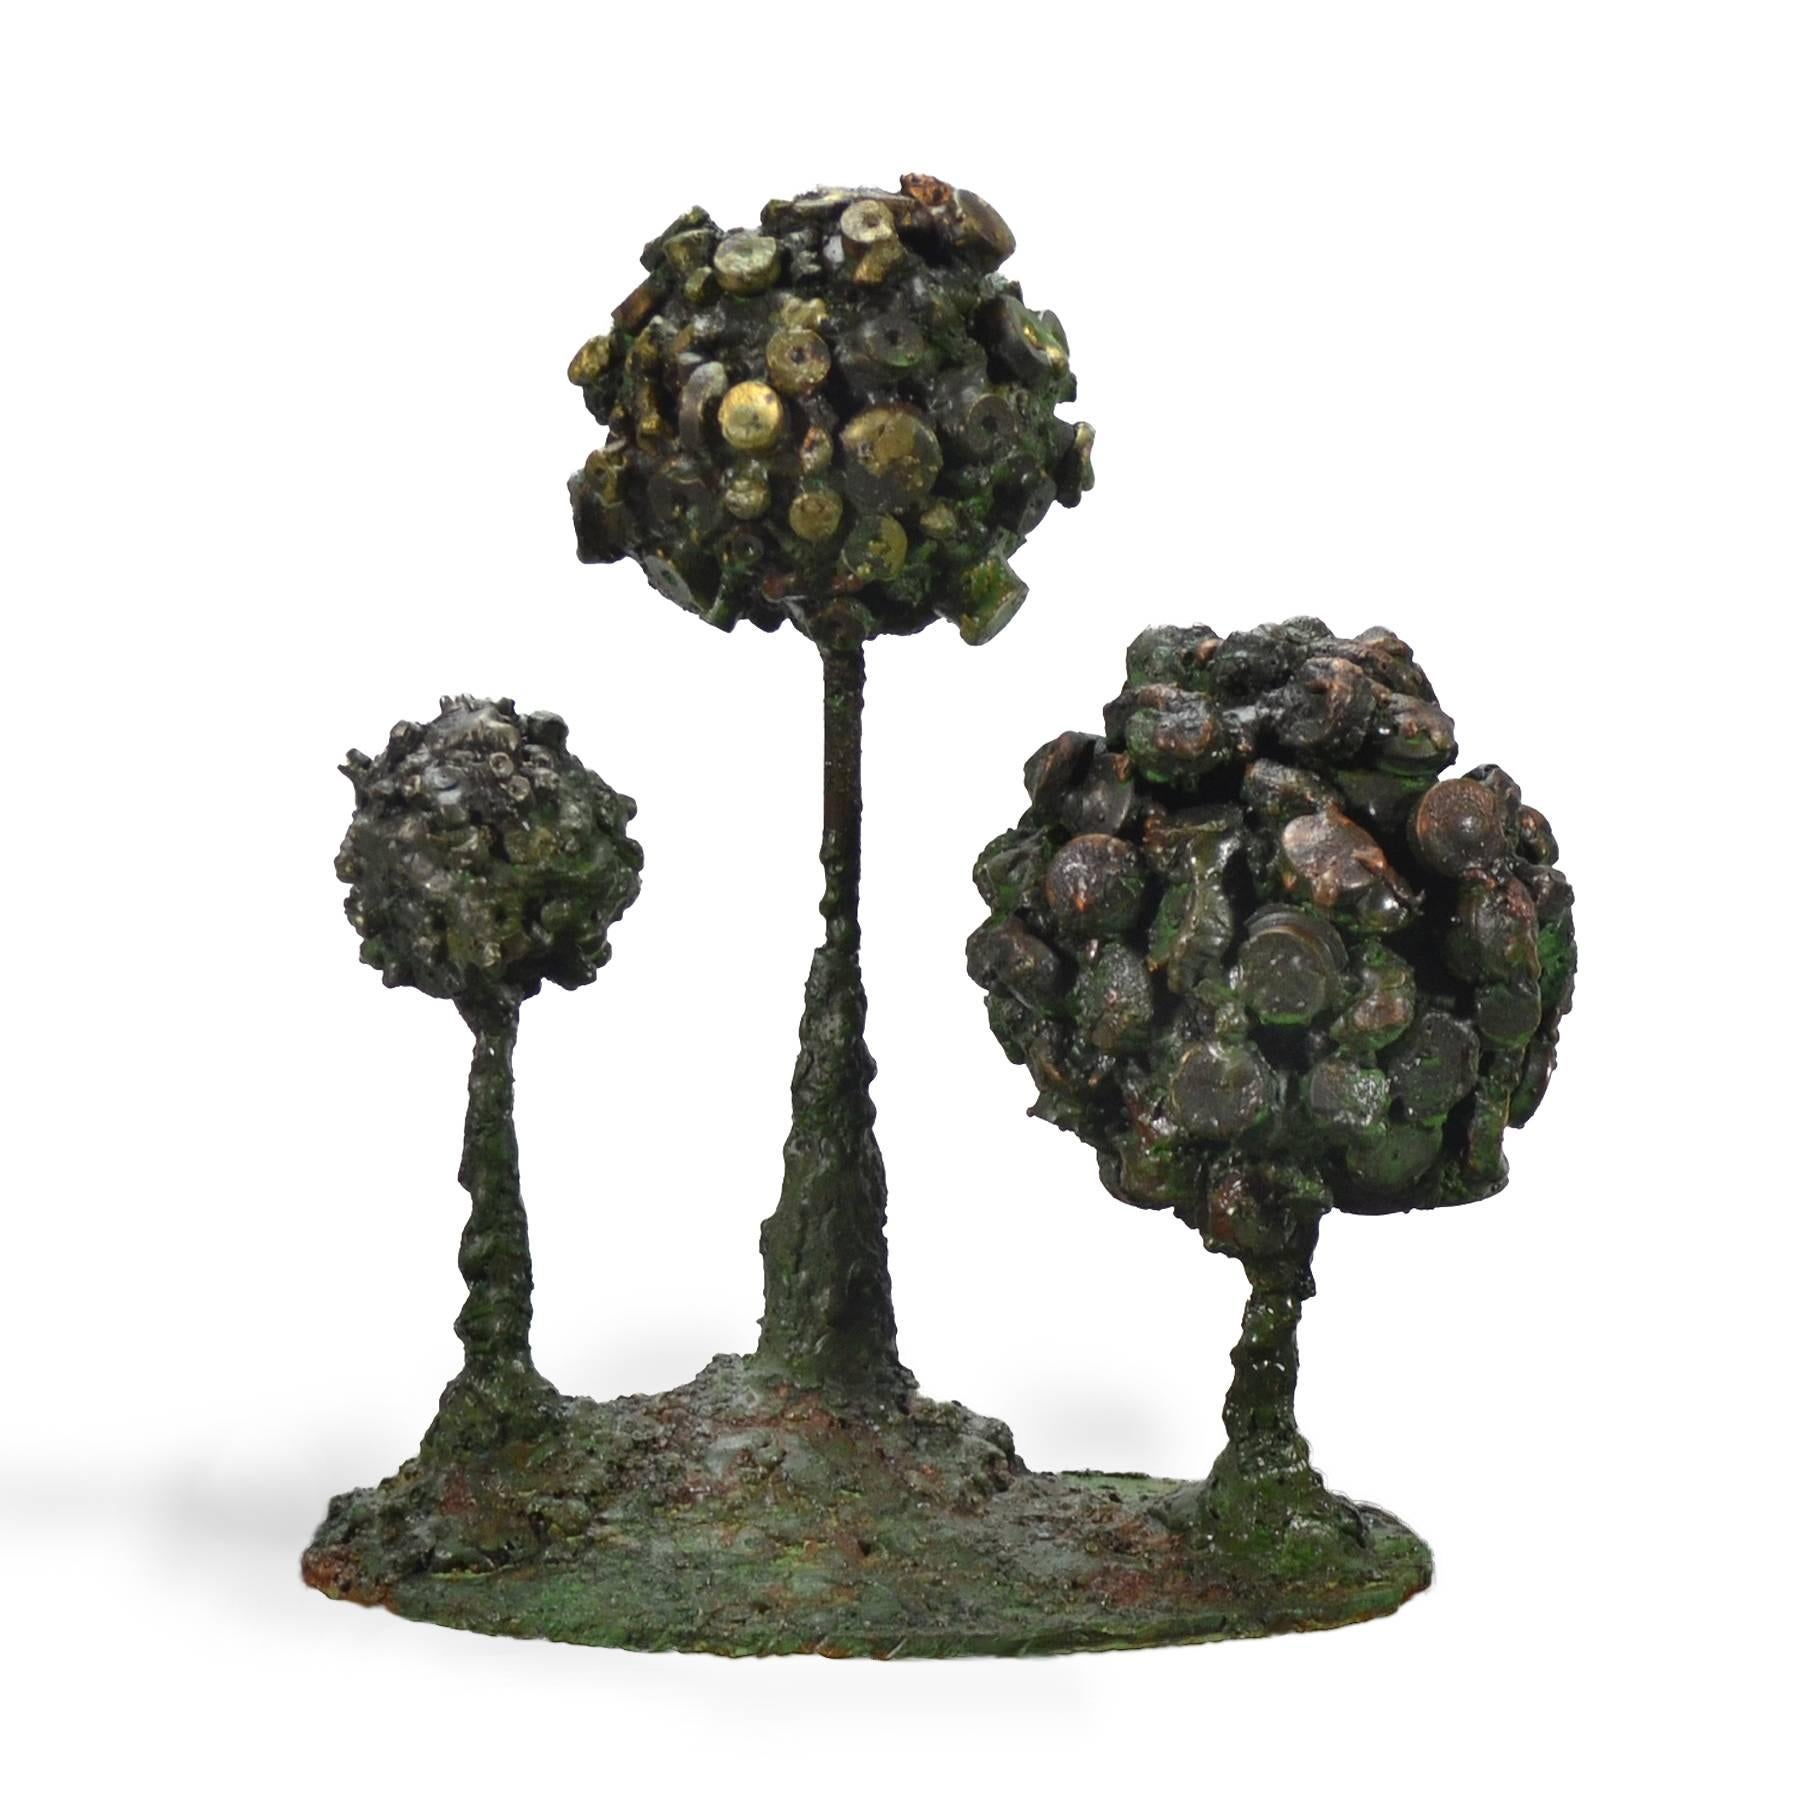 This delightful Brutalist sculpture by James Bearden is also a functional piece with a concealed trinket box in the largest of the “Pod” forms. It is crafted of patinated steel with fused bronze and glass enamel elements and has a wonderful visceral